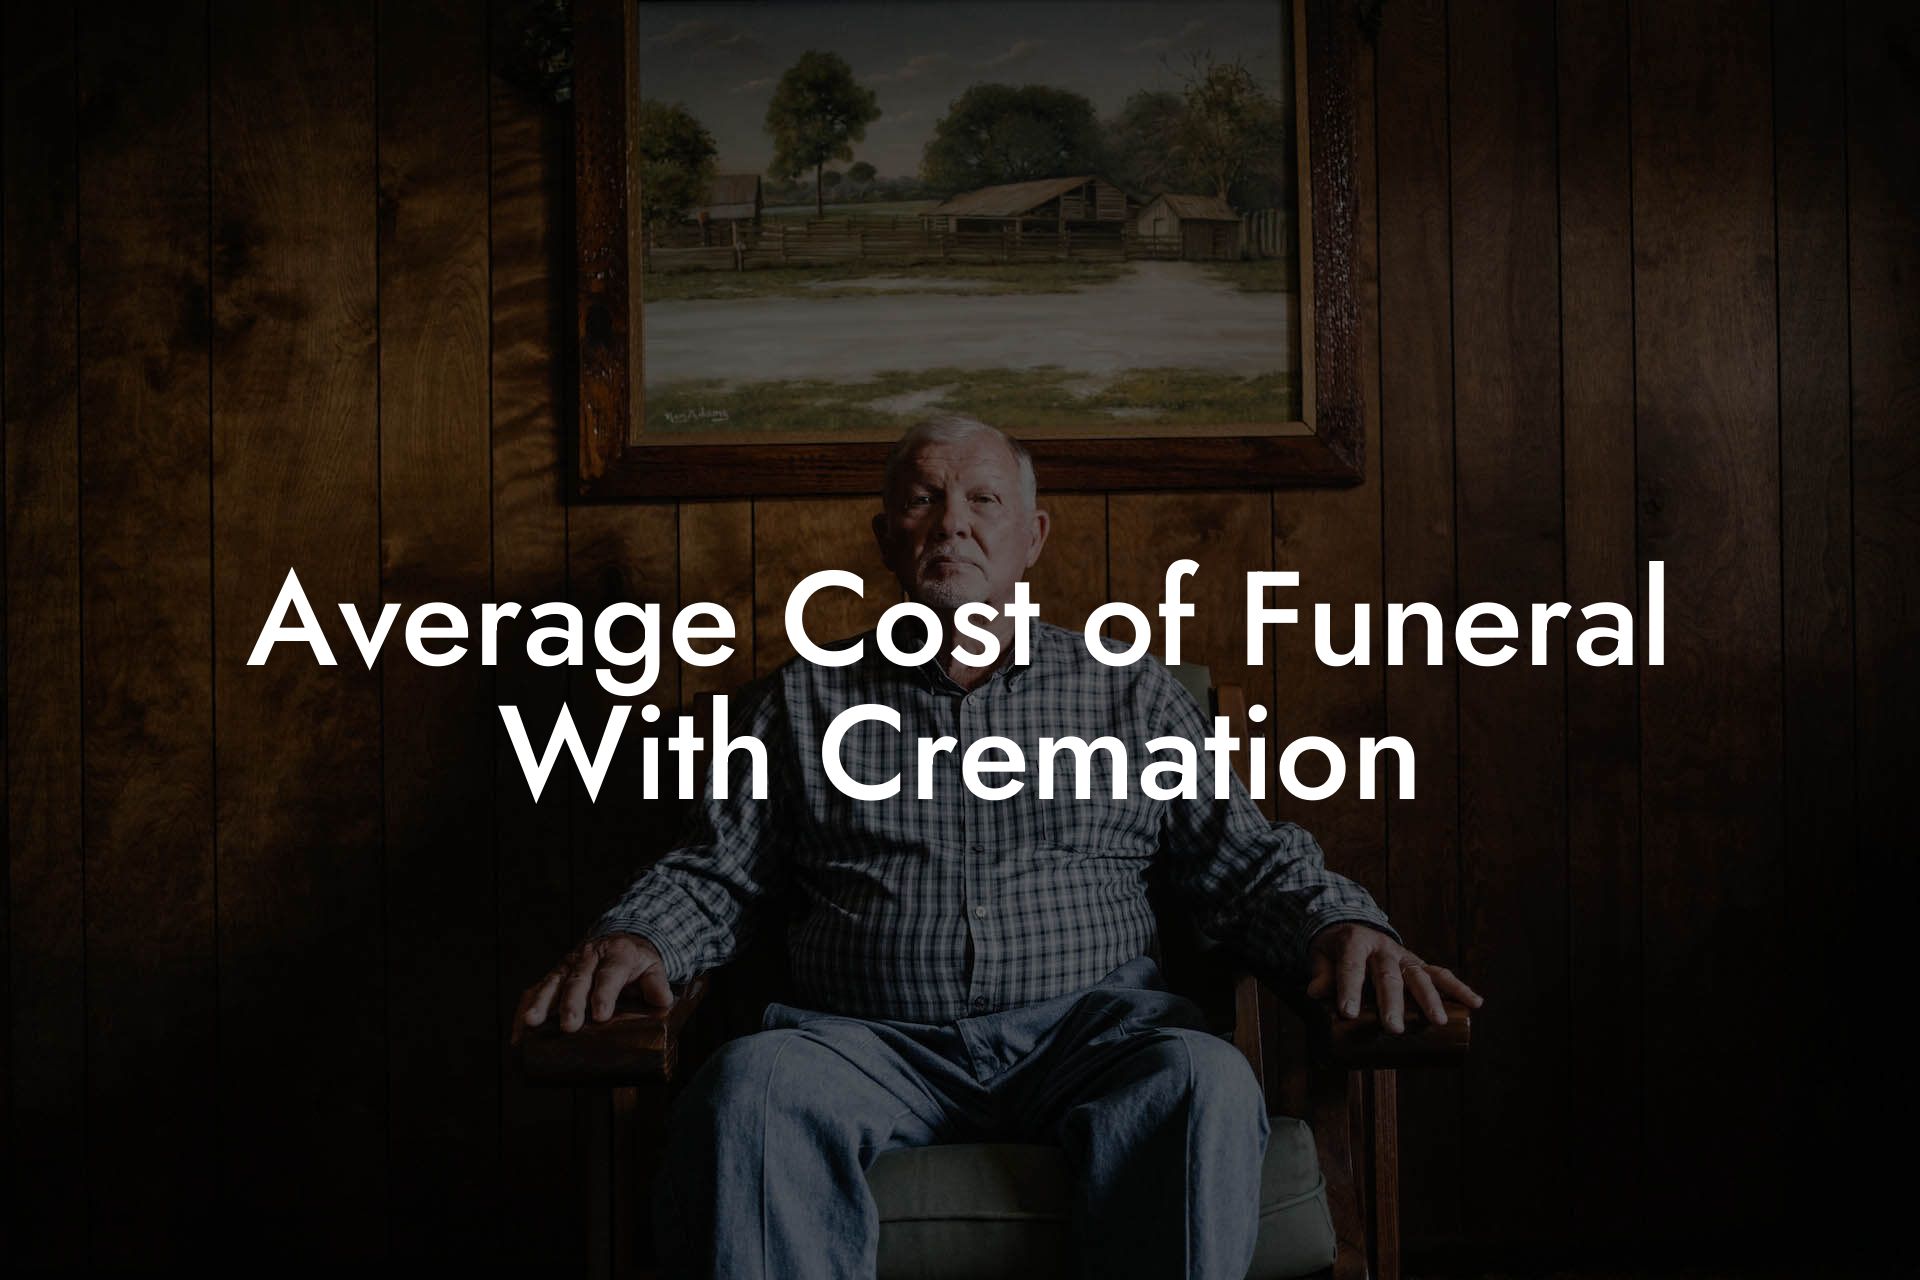 Average Cost of Funeral With Cremation